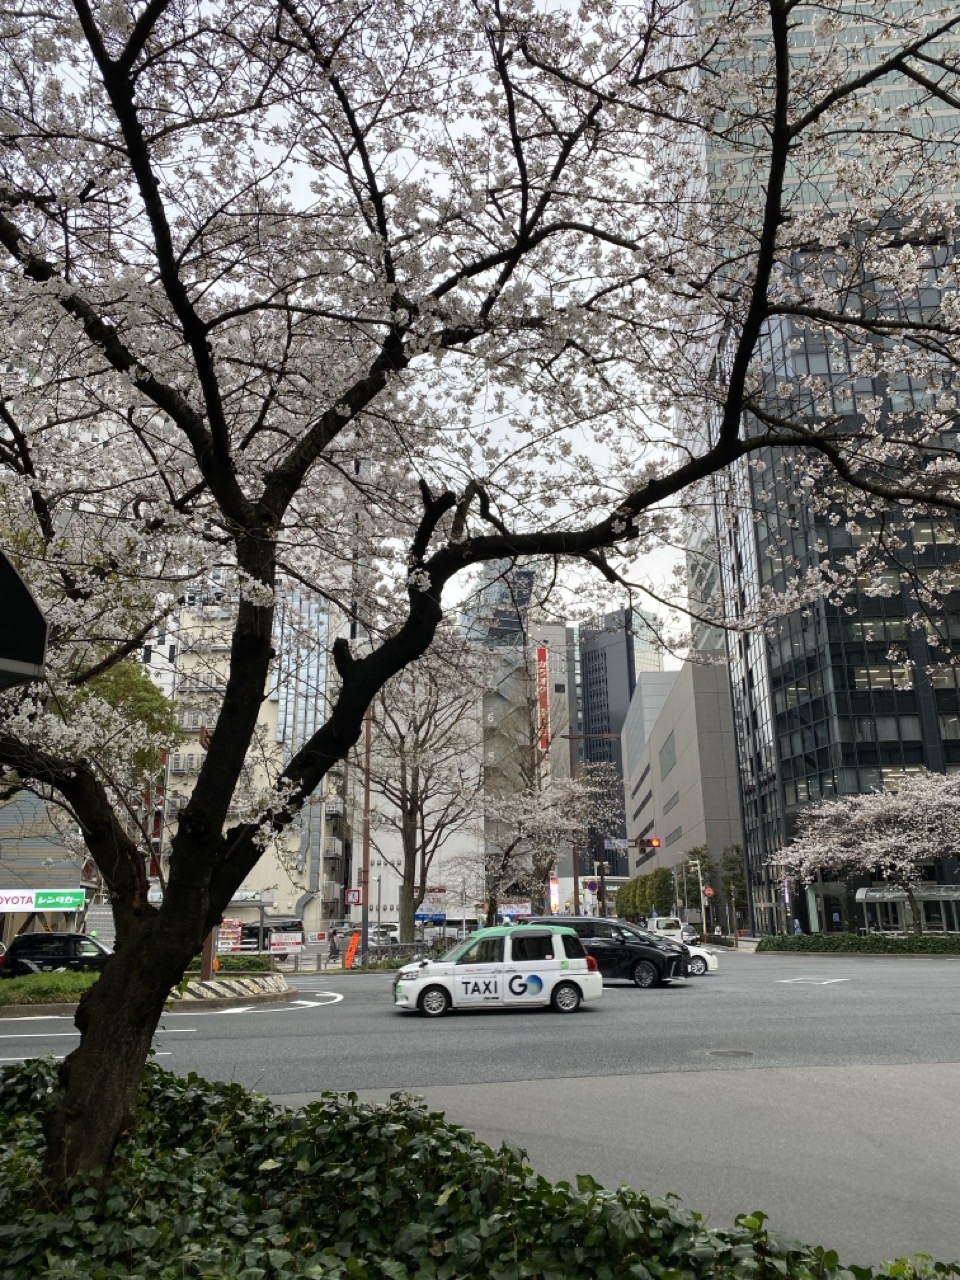 A picture of the cherry blossoms on a street in Nagoya.